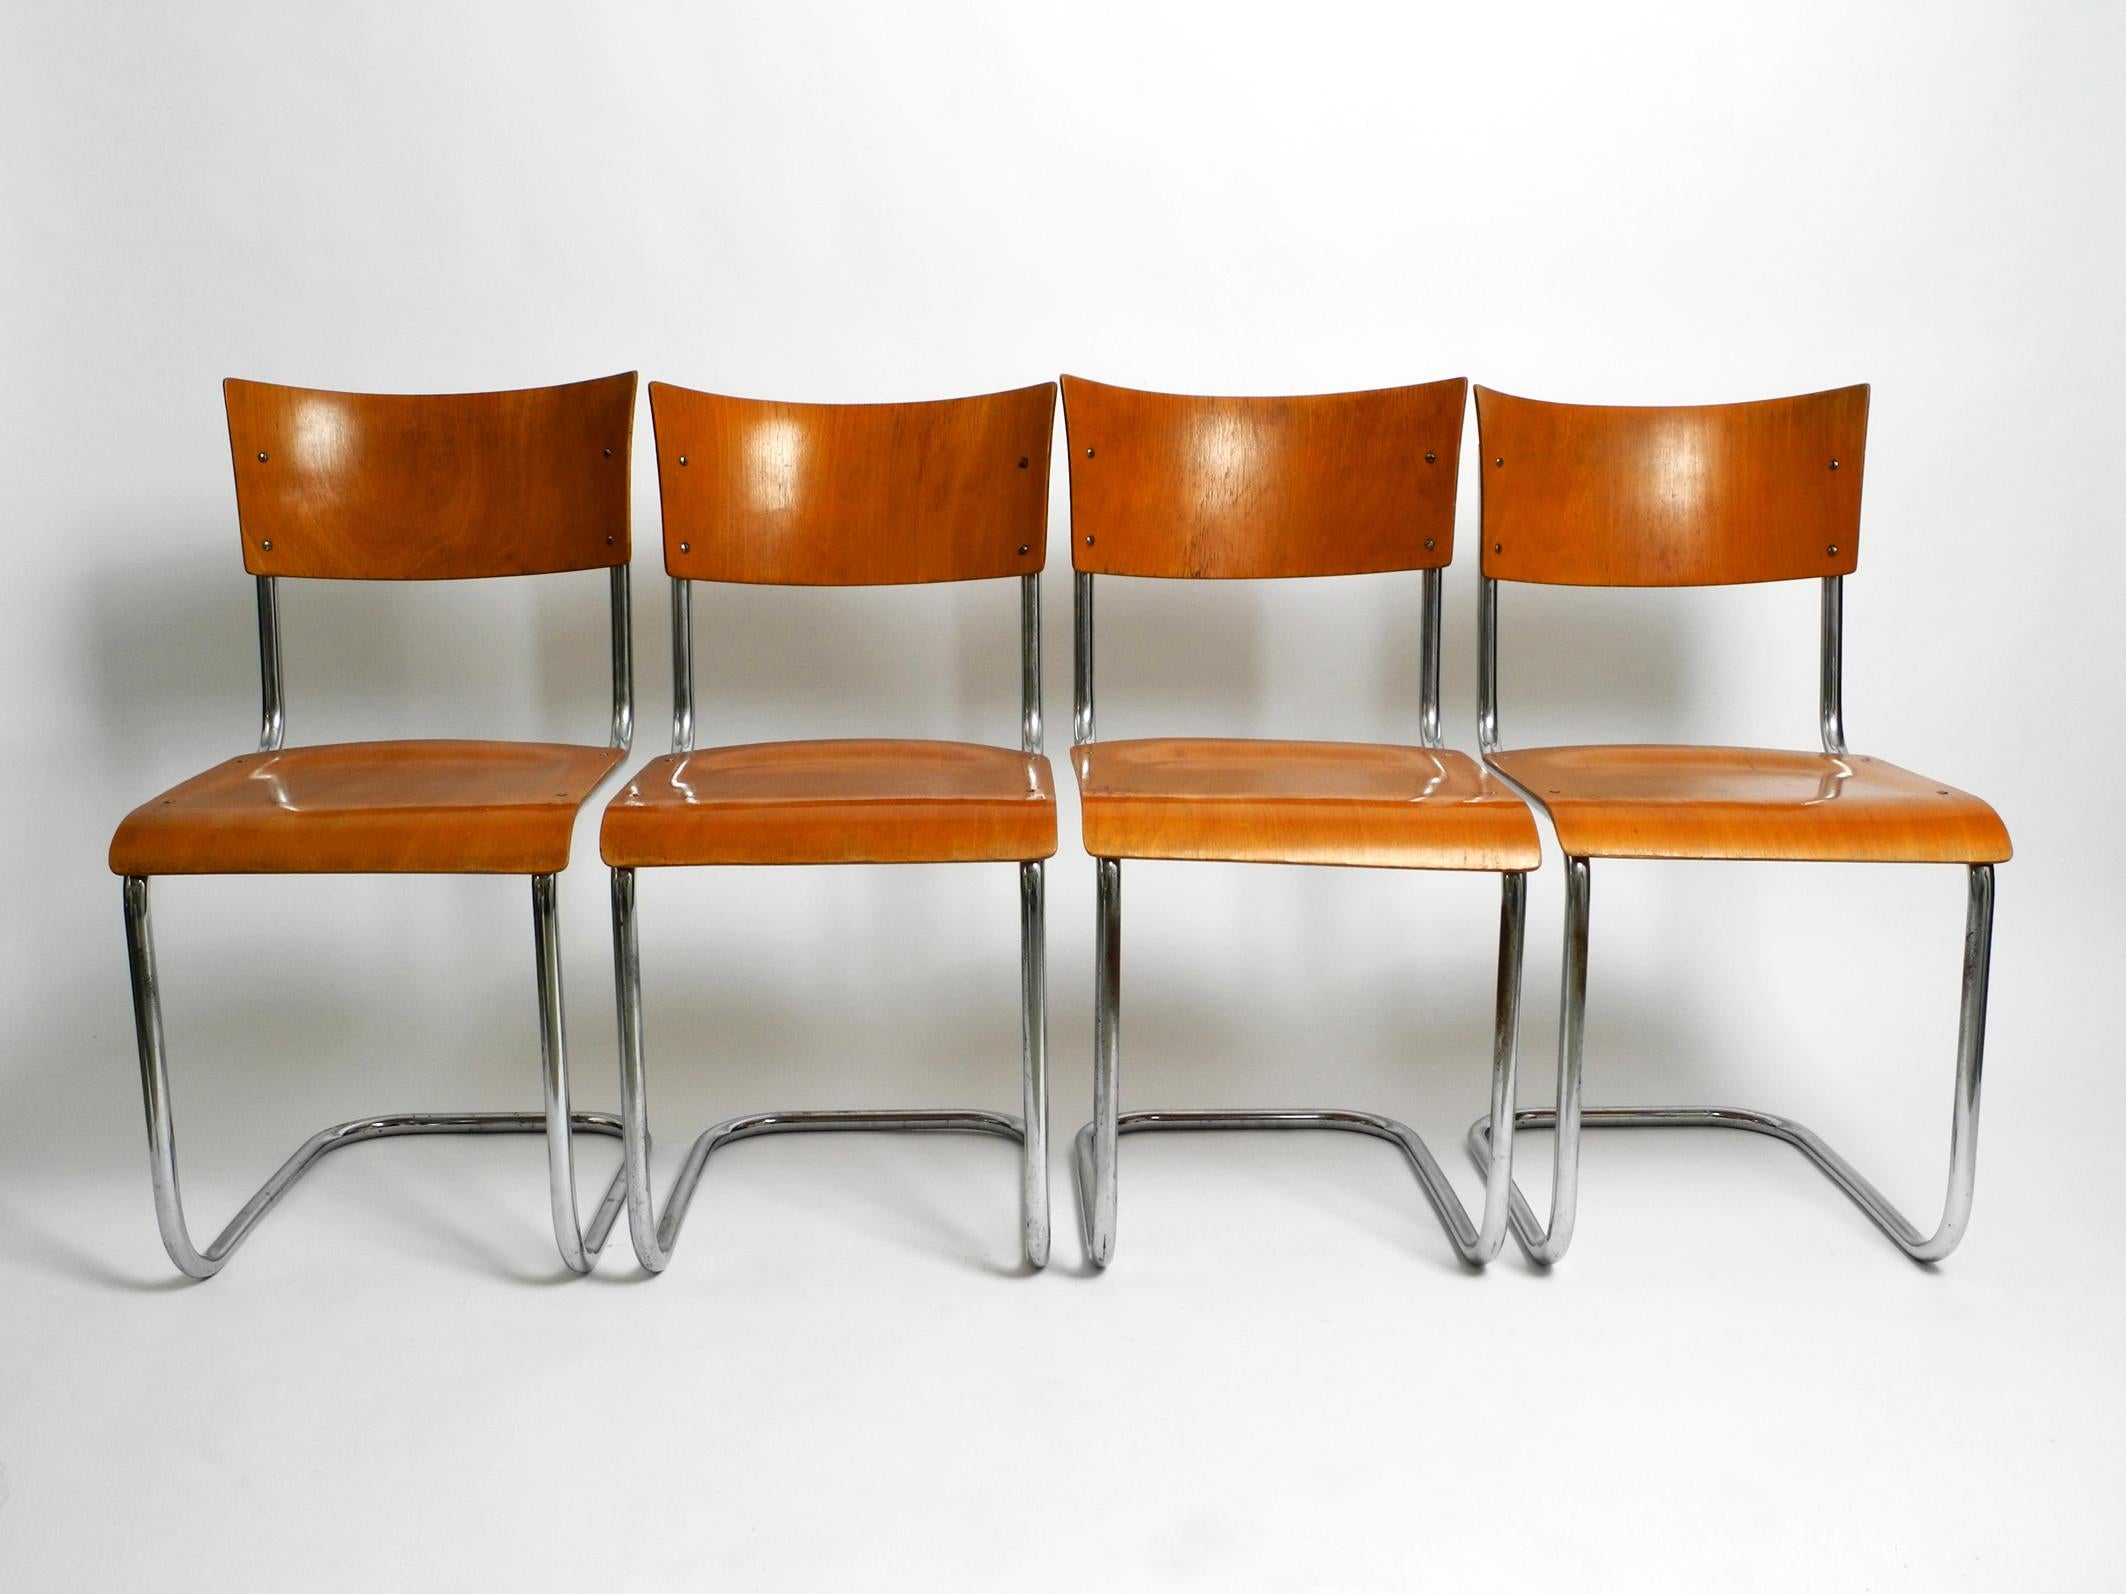 Four 1930s cantilever tubular steel Bauhaus chairs.
Design by the well-known Dutch architect Mart Stam.
Manufacturer is furniture factory Robert Slezak. Made in Czech.
Seat and backrest are made of plywood.
All four chairs are in the same very good